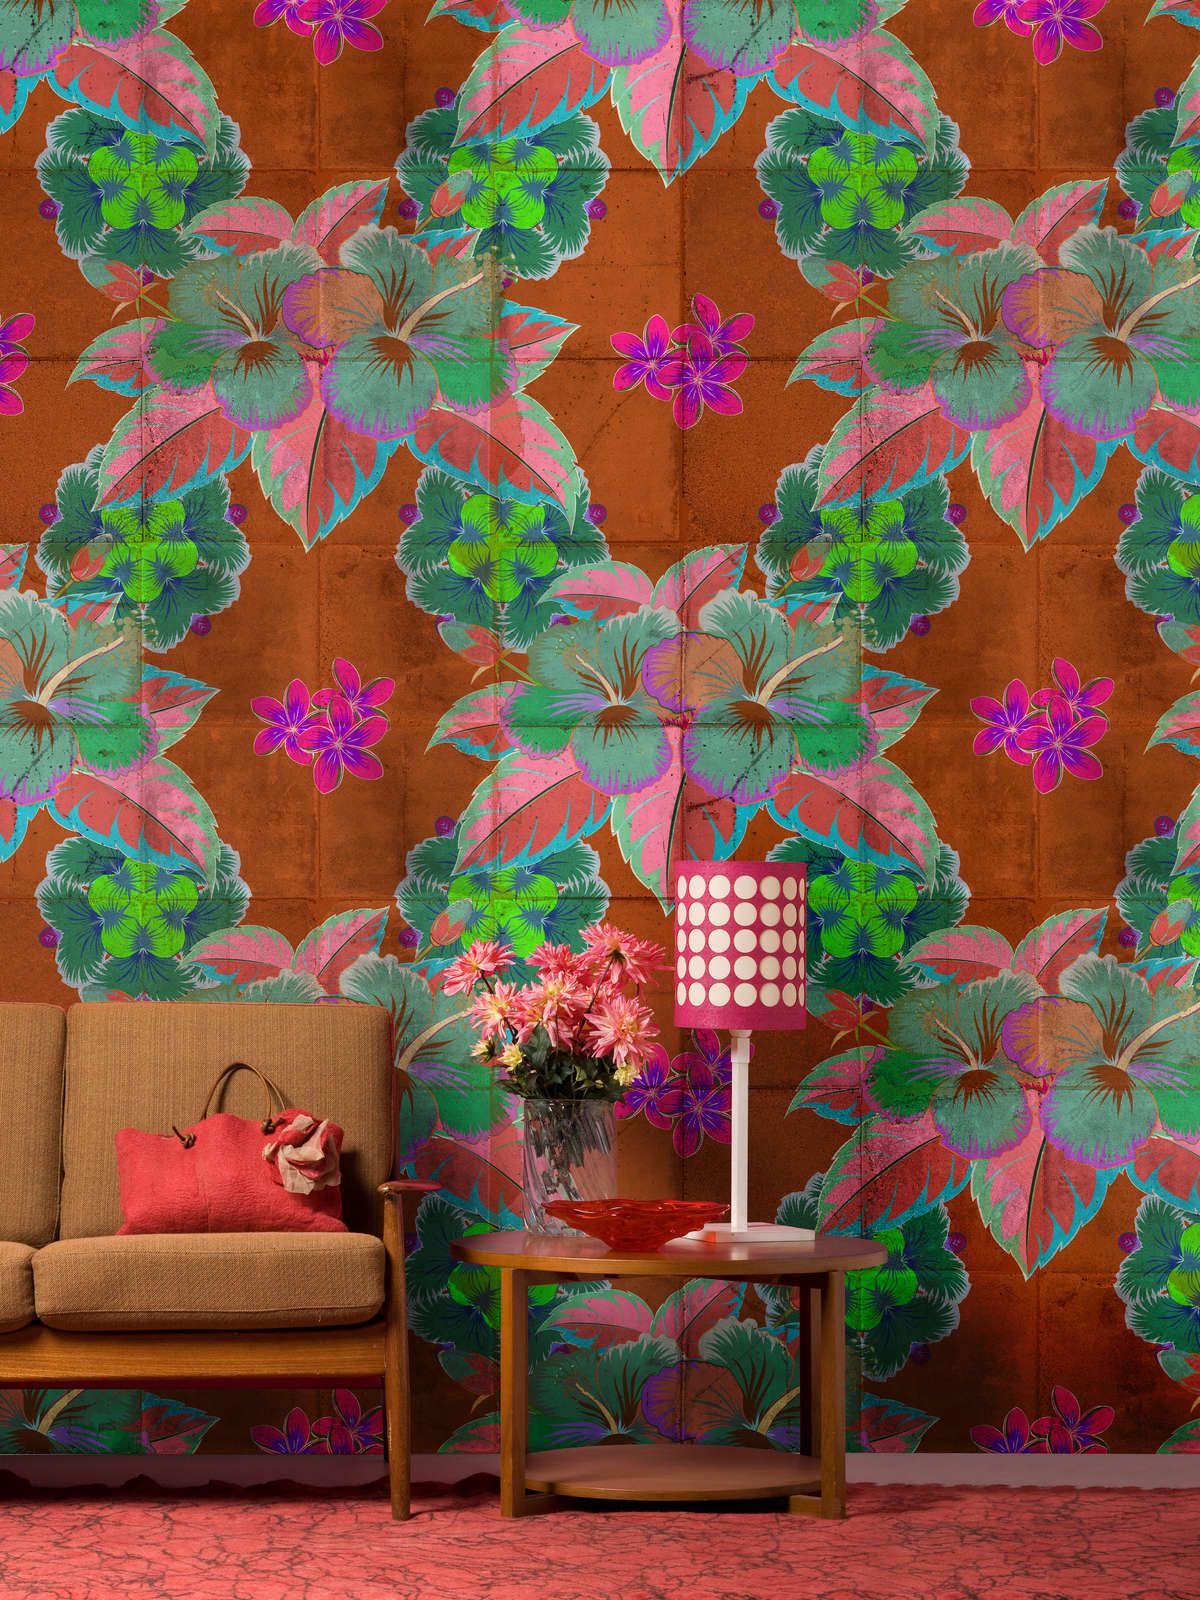             Photo wallpaper »pierre« - Leaf design with kaleidoscope effect on concrete tile structure - Matt, smooth non-woven fabric
        